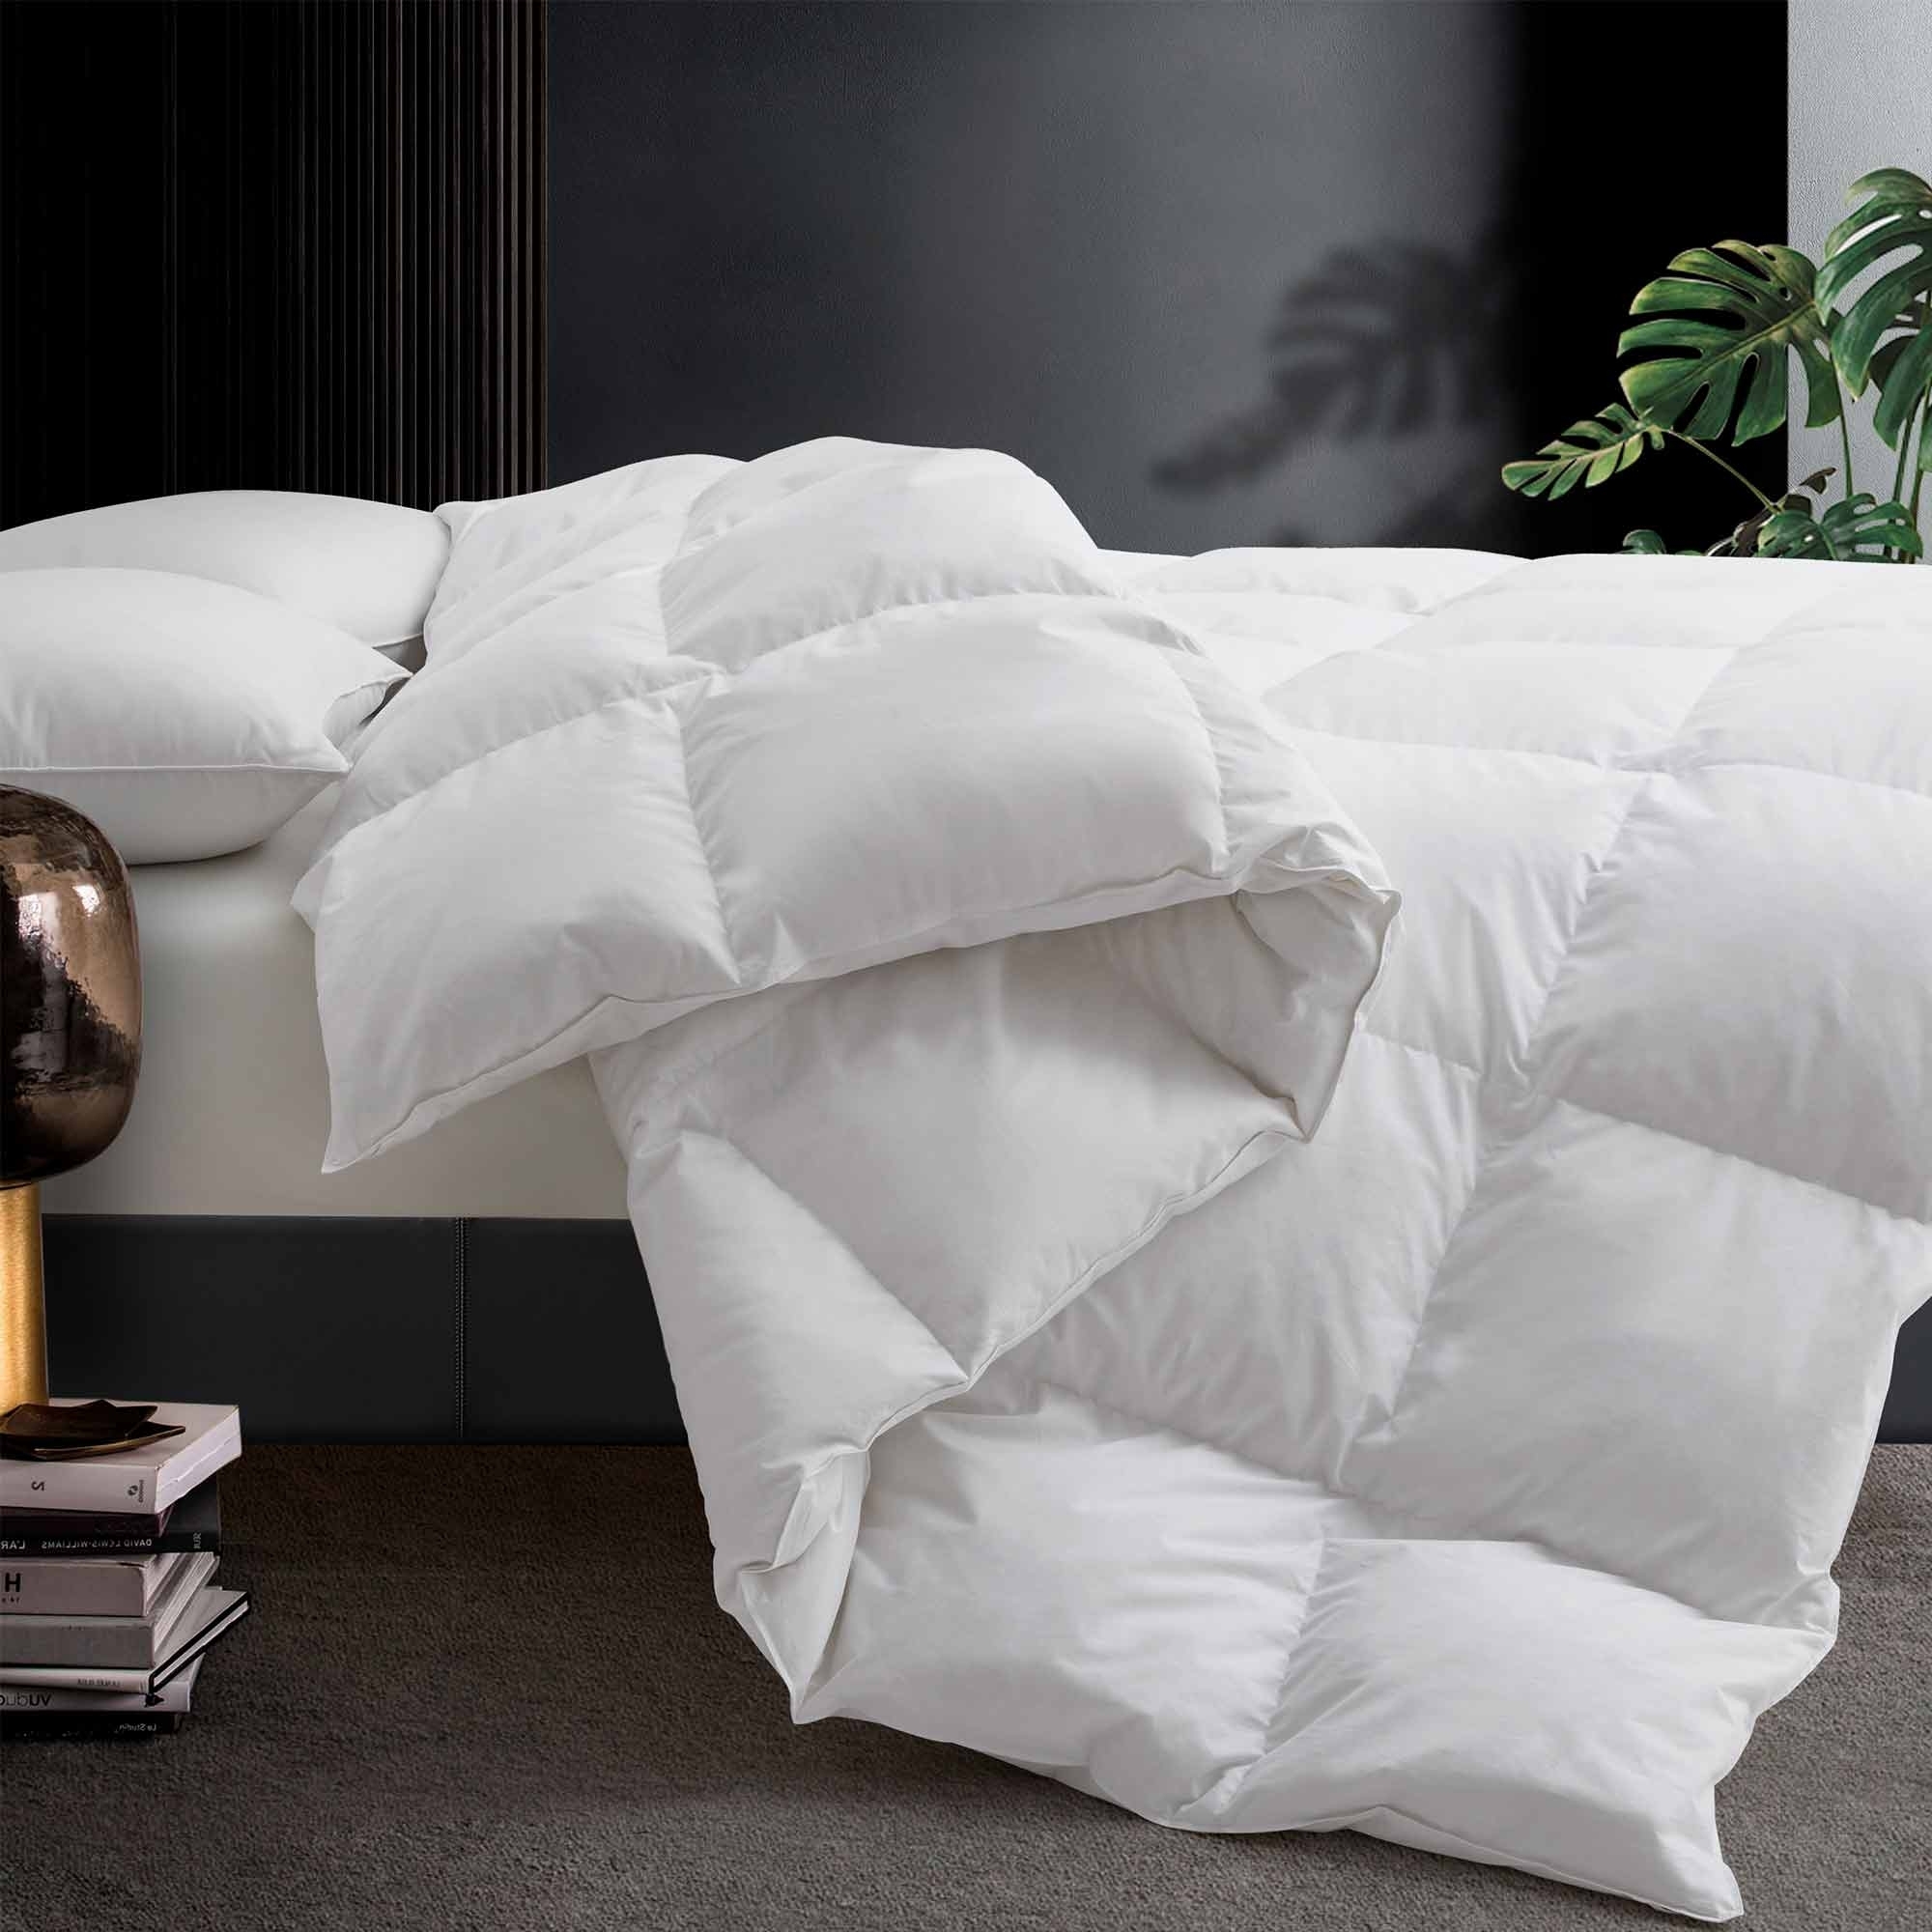 White Goose Feather And Down Comforters, Lightweight And Medium Weight Duvet Insert - Medium Weight, Twin